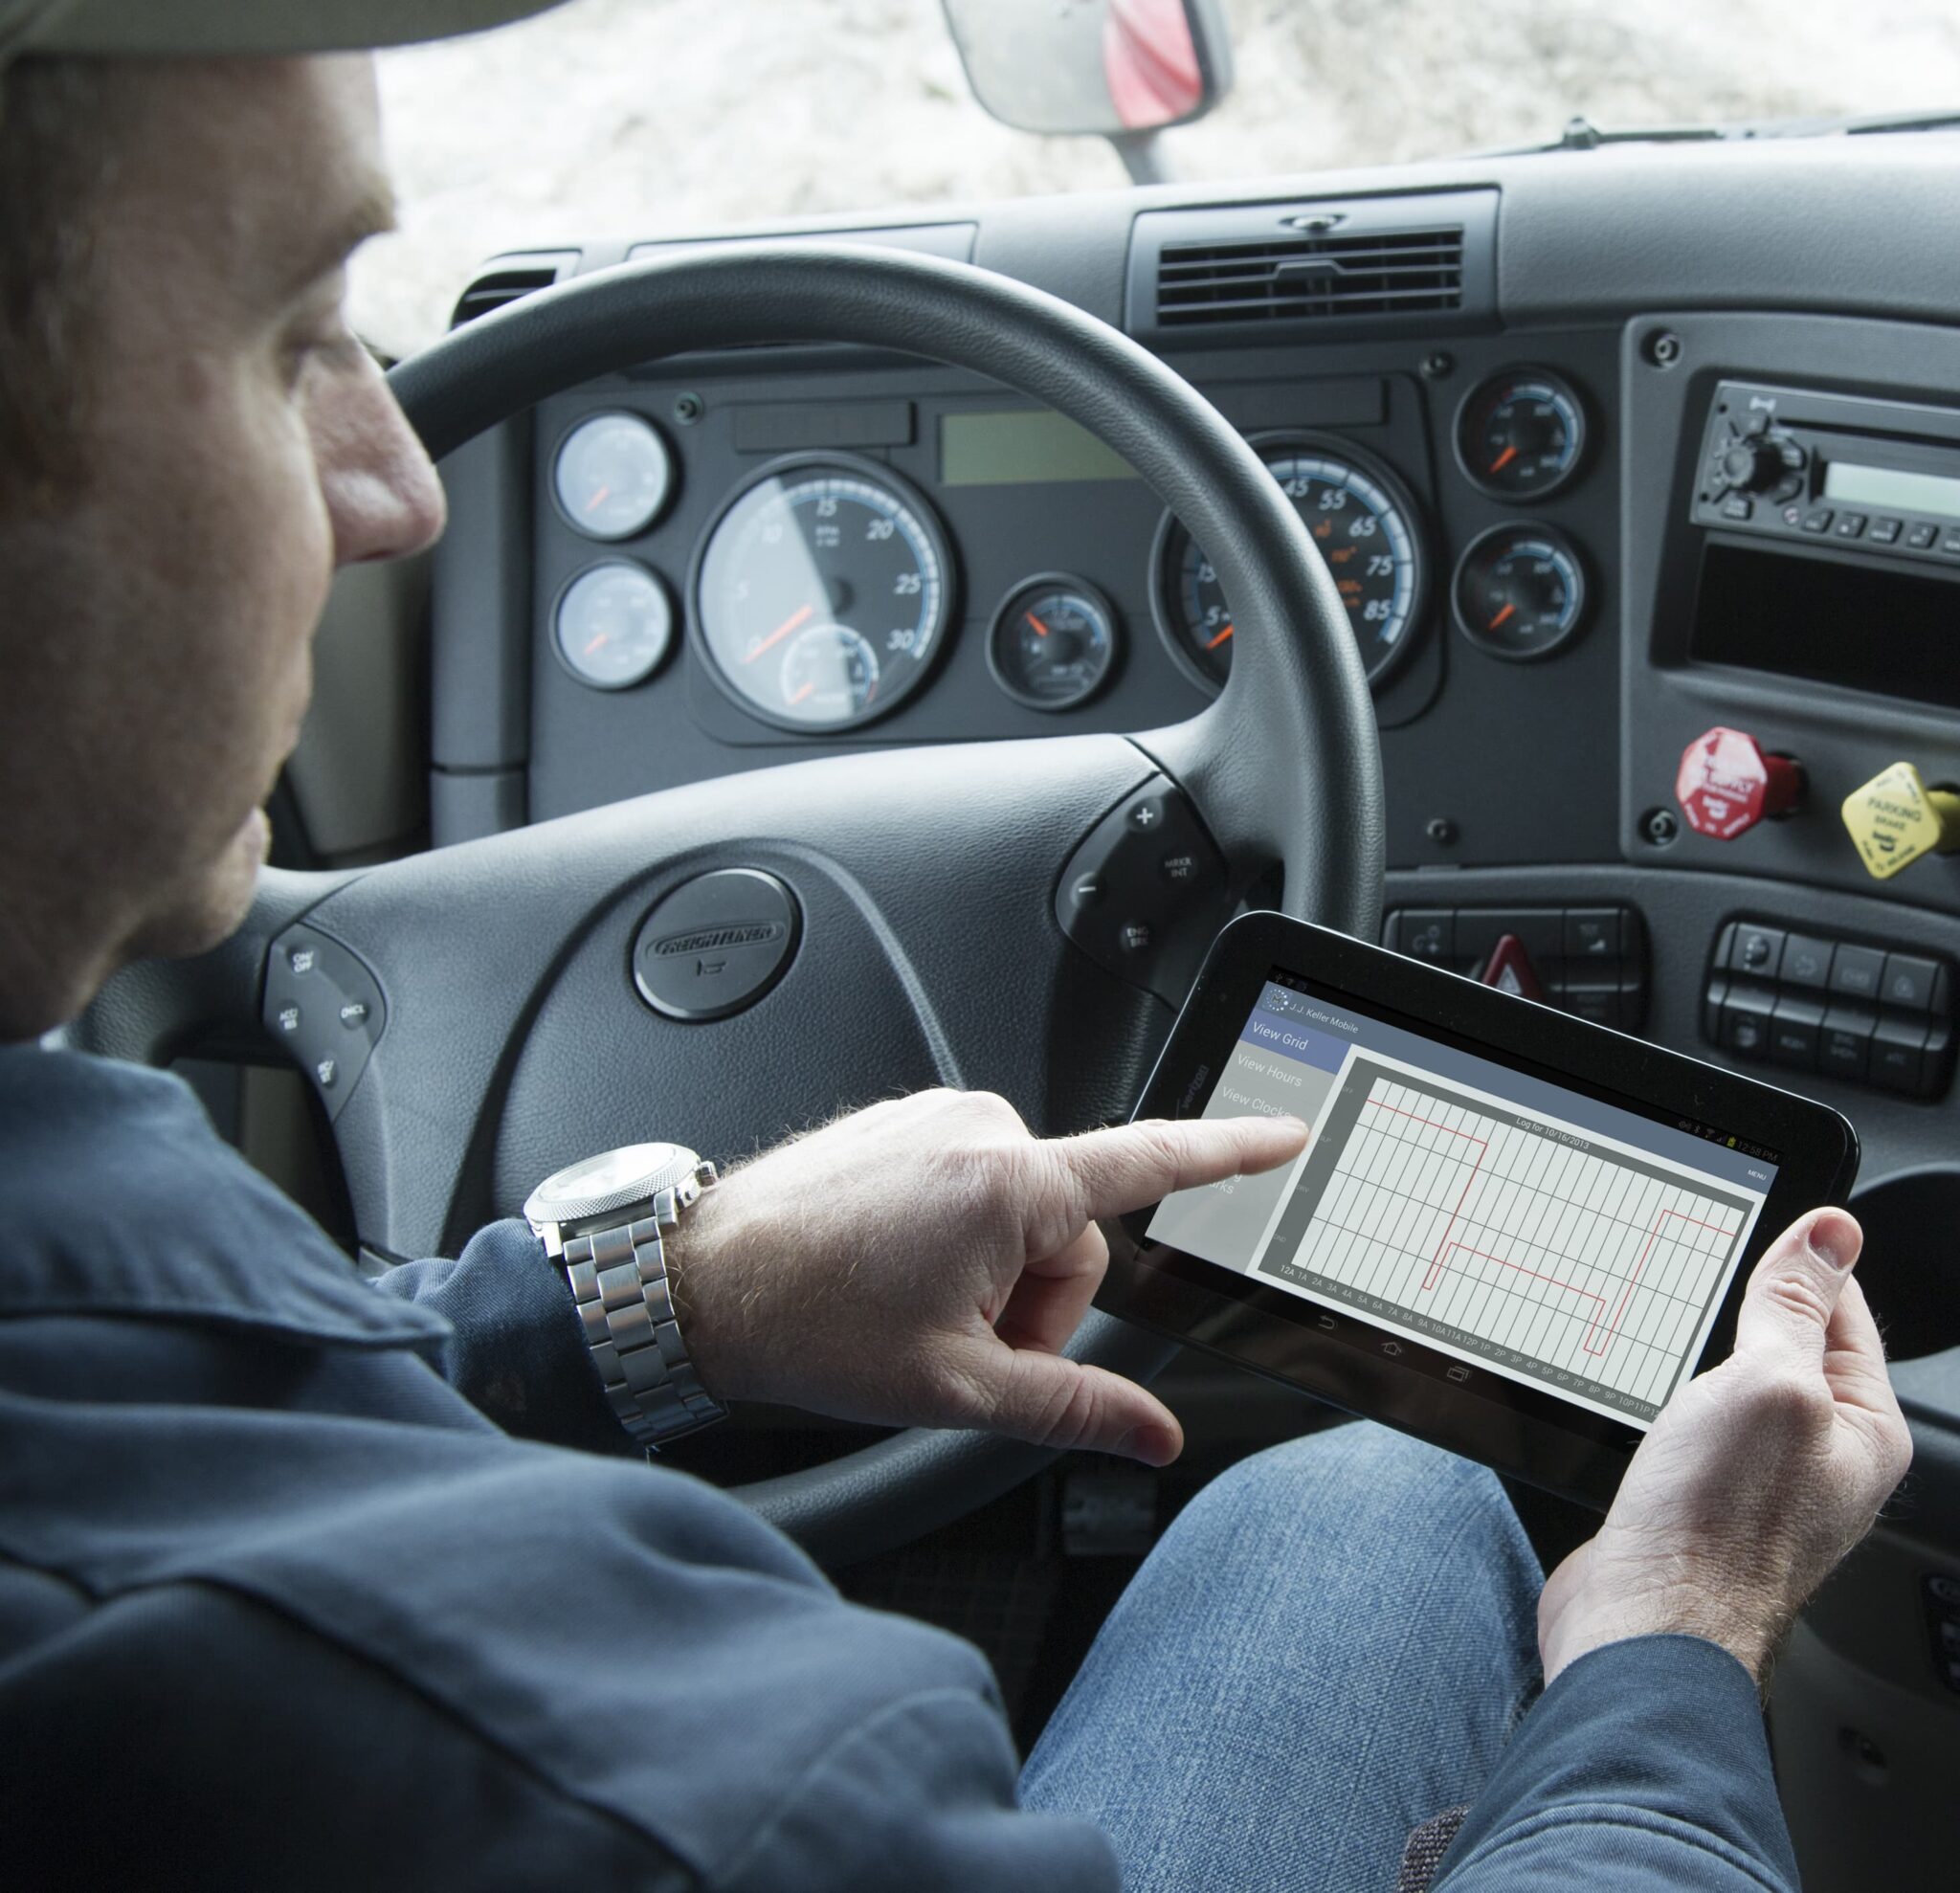 FMCSA Rolls Out New Hours of Service Rules for Truck Drivers - HazmatNation